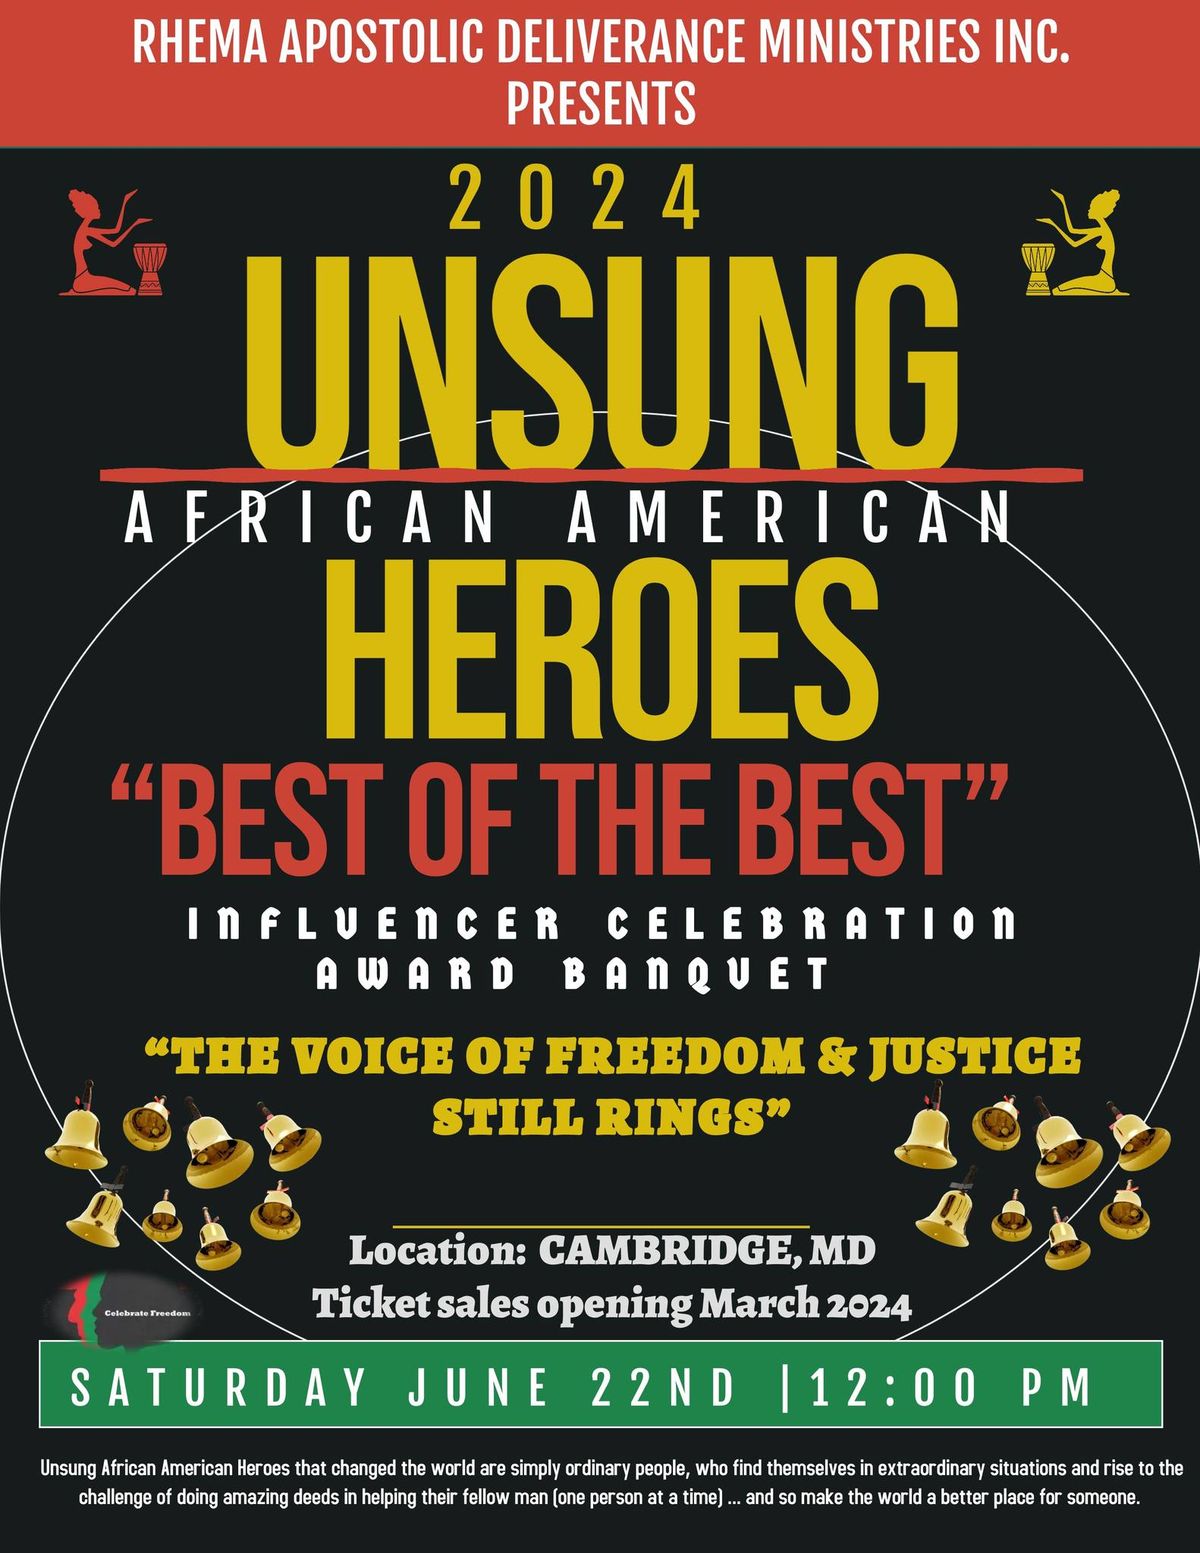 2024 UNSUNG AFRICAN AMERICAN HEROES "BEST OF THE BEST" INFLUENCER CELEBRATION AWARD BANQUET 